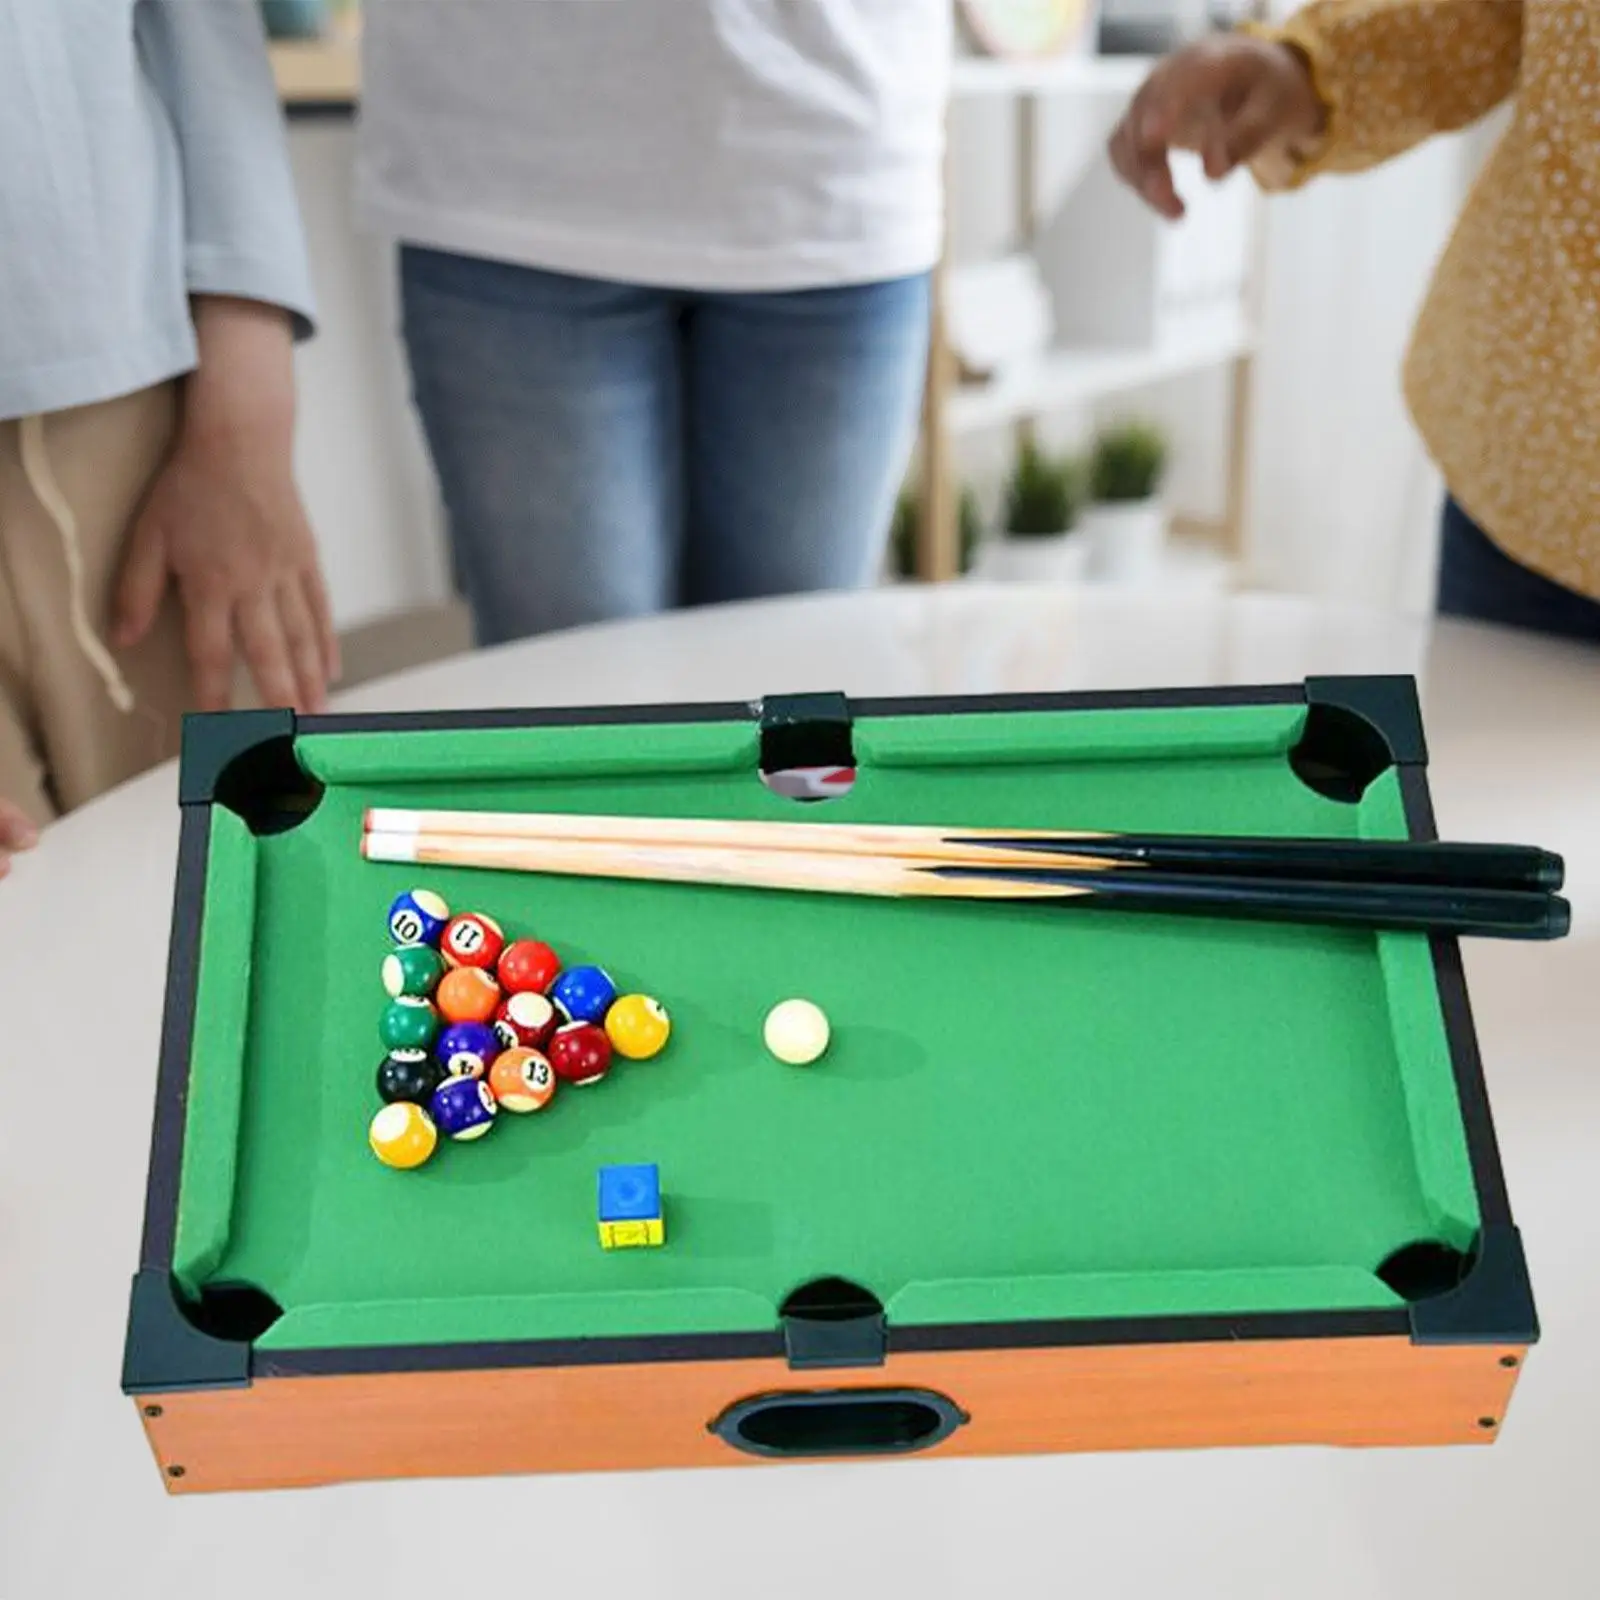 Mini Pool Table Home Play Motor Skills Billiards Toy for Playroom Party Home